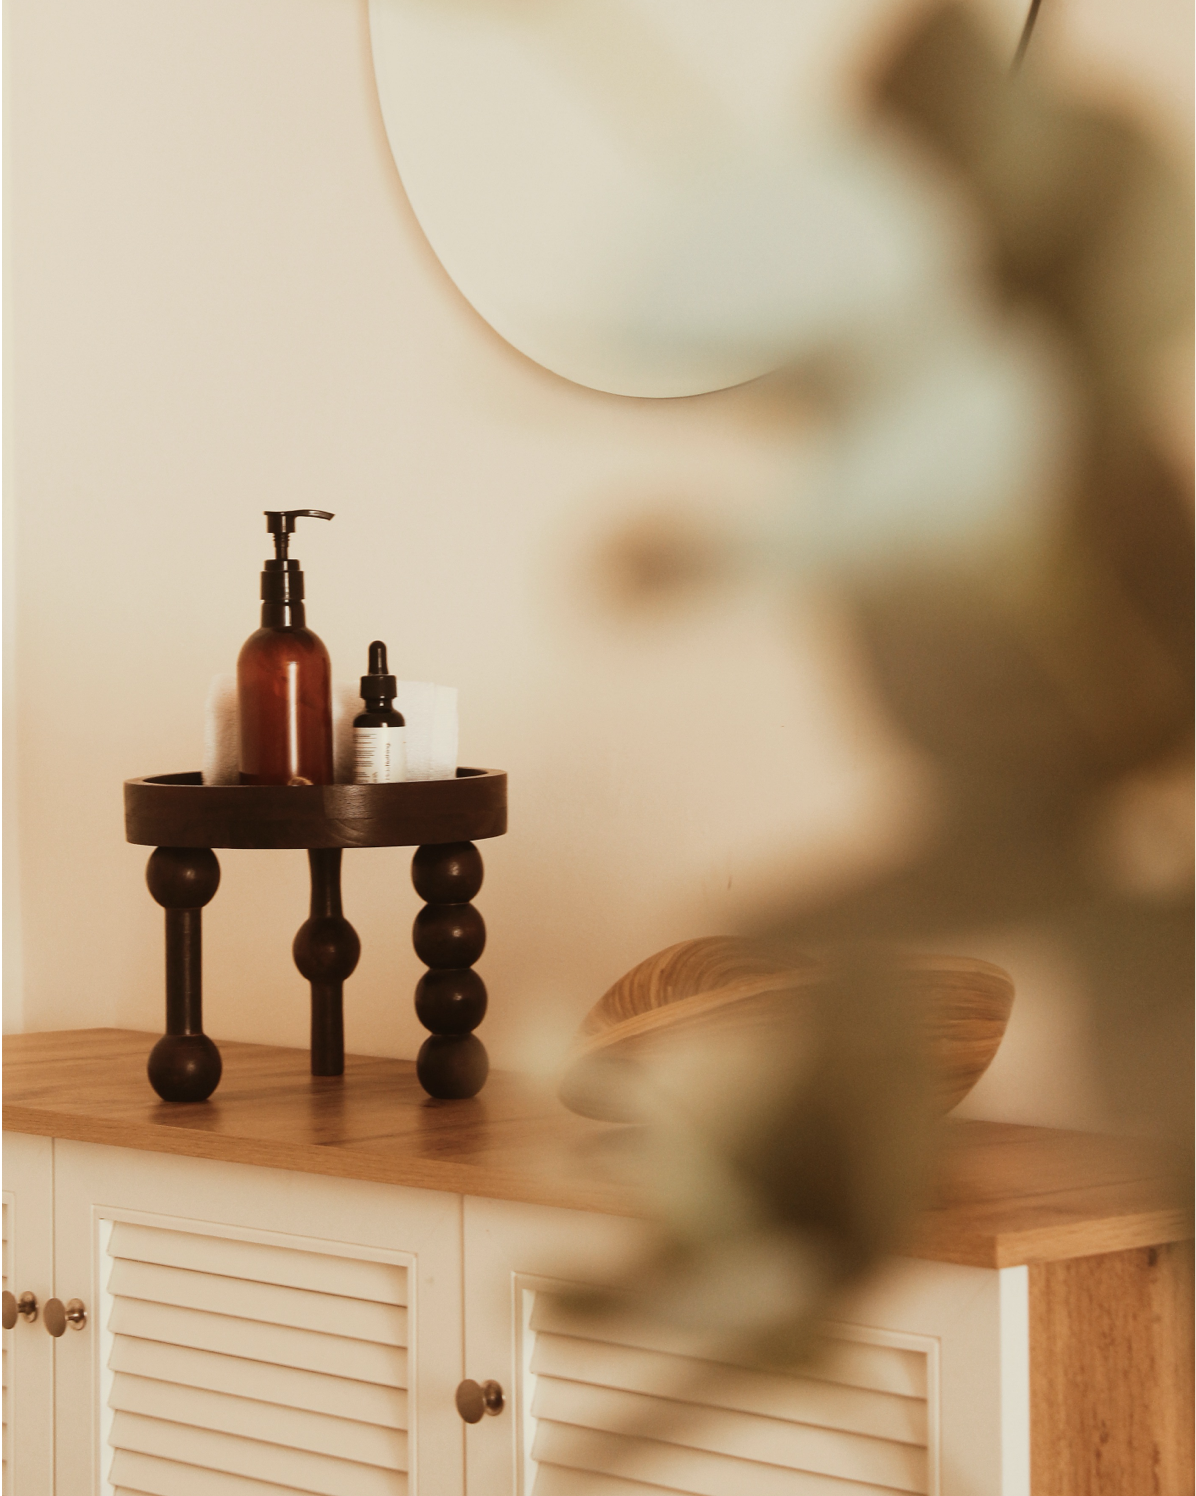 Wooden stool with beauty creams on the top